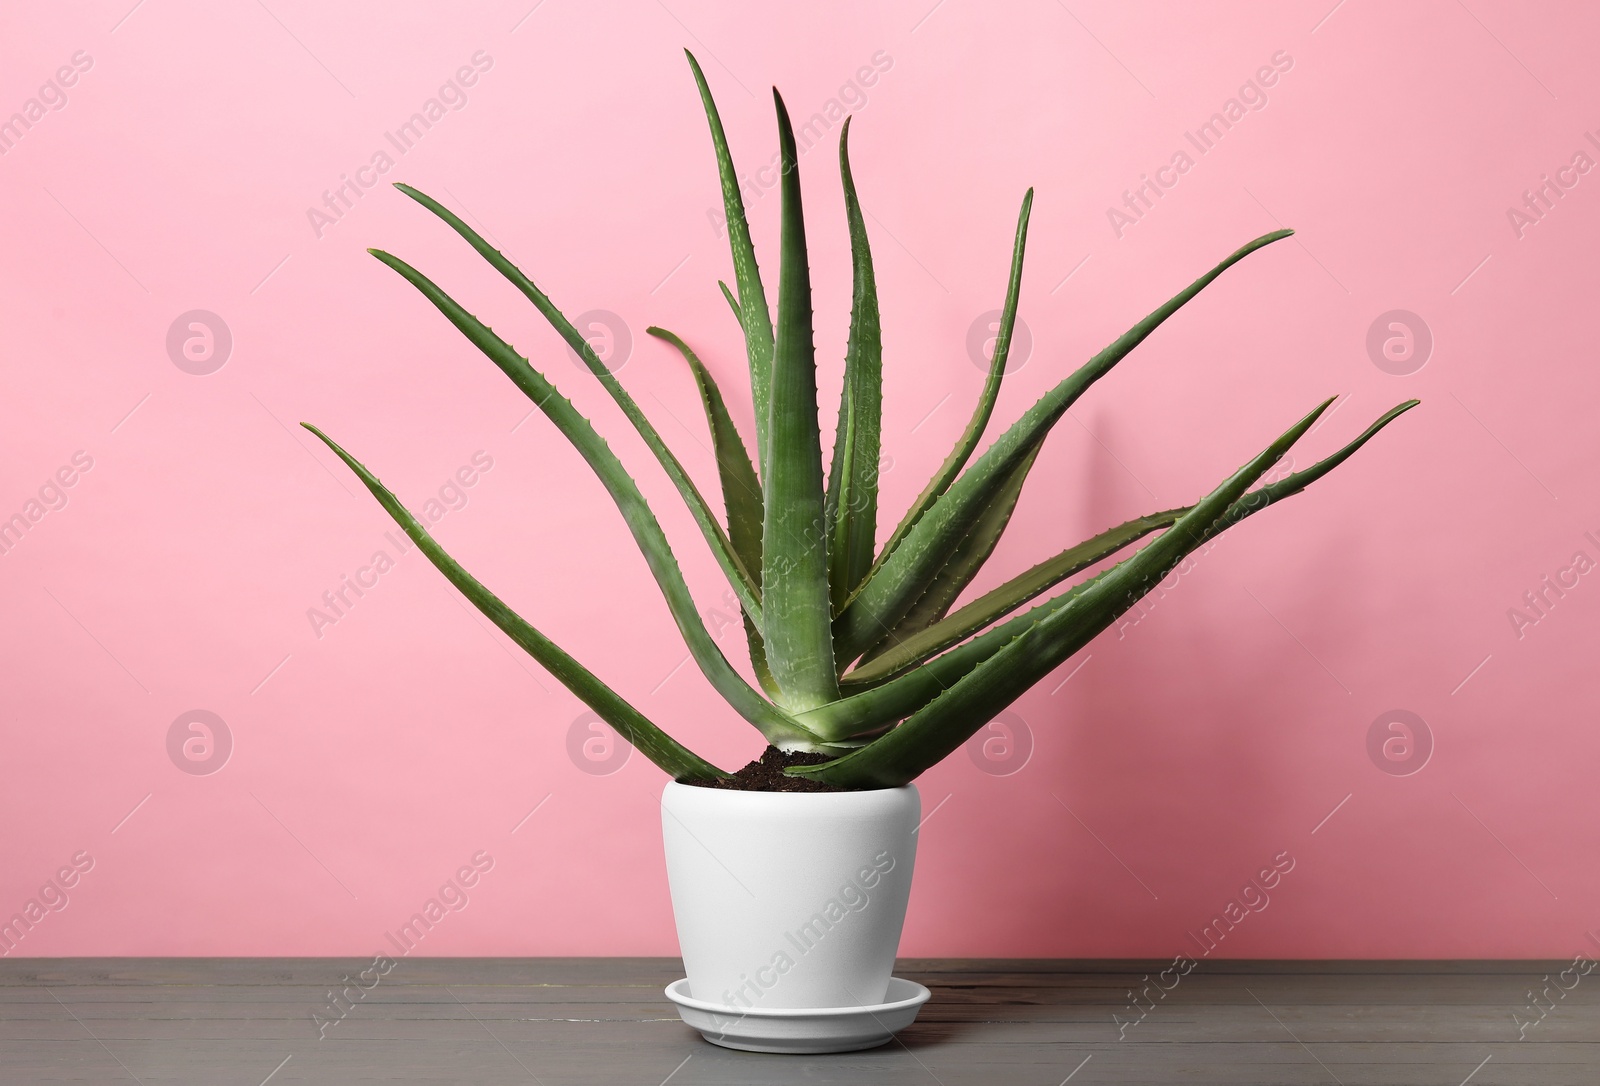 Photo of Green aloe vera in pot on grey wooden table against pink background